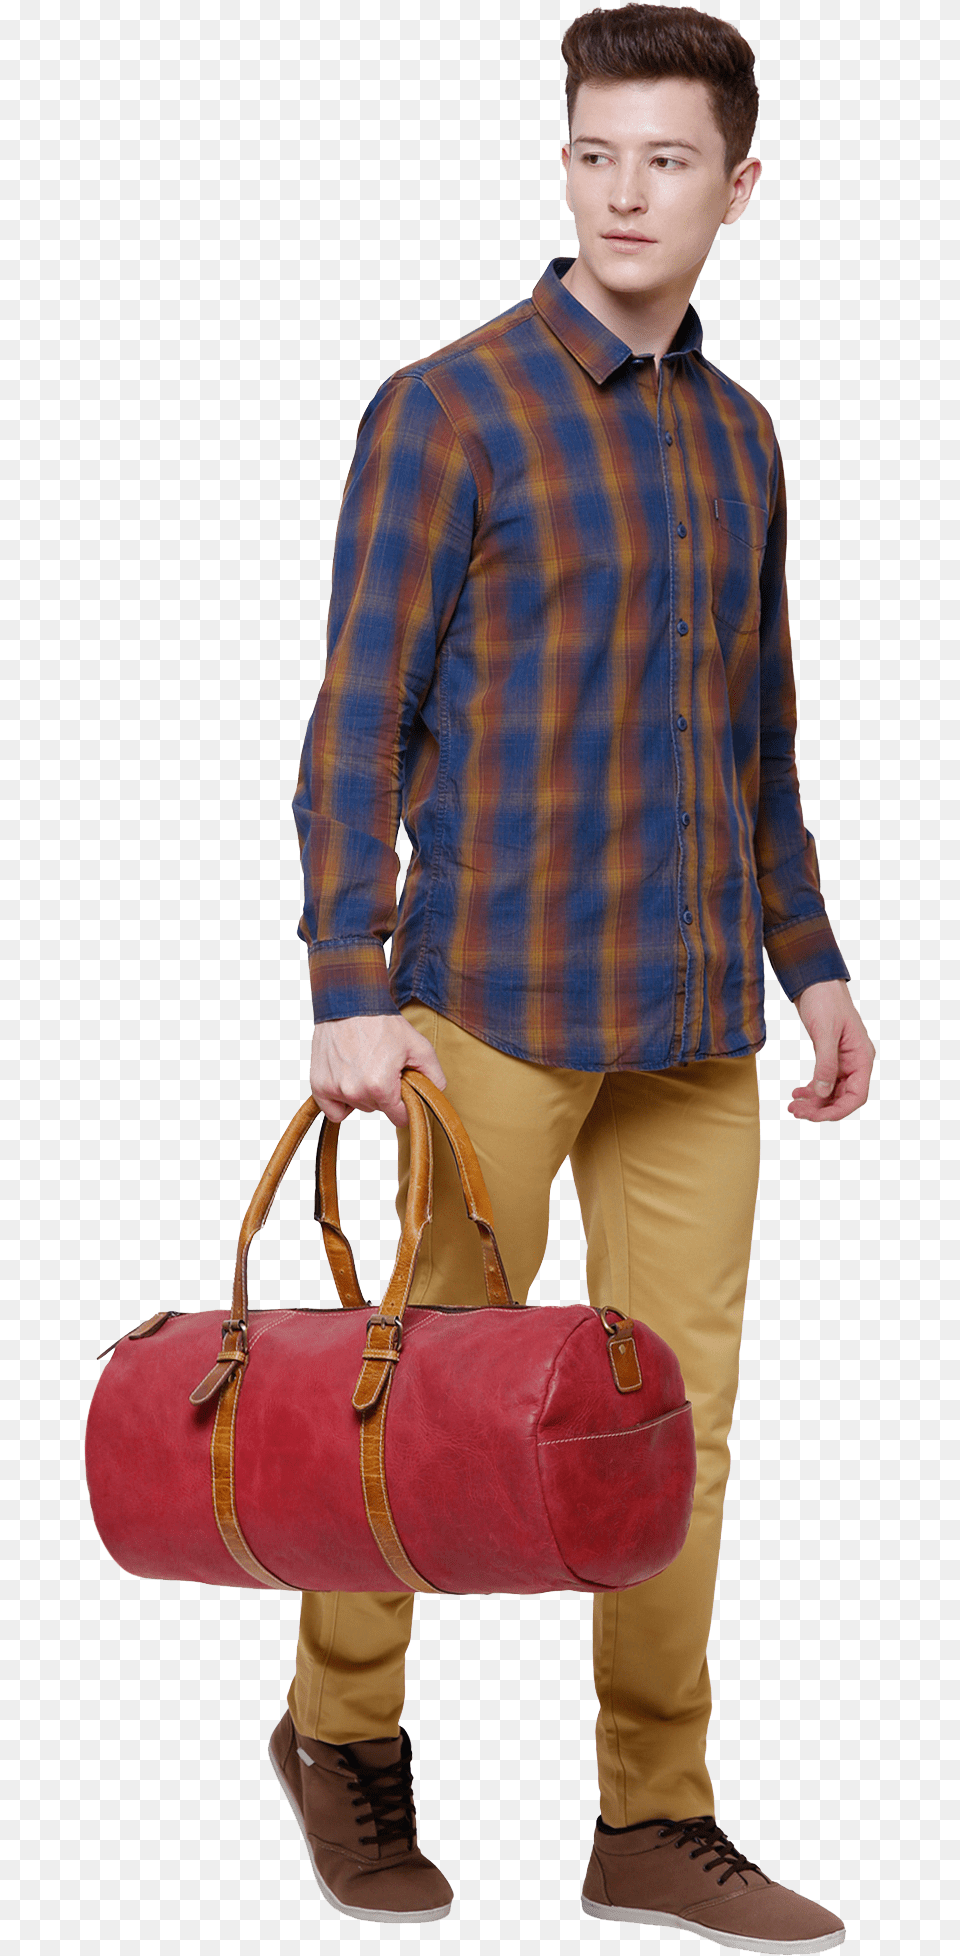 Handcrafted Genuine Leather Duffel Bags Travel Luggage Plaid, Accessories, Shirt, Bag, Clothing Png Image